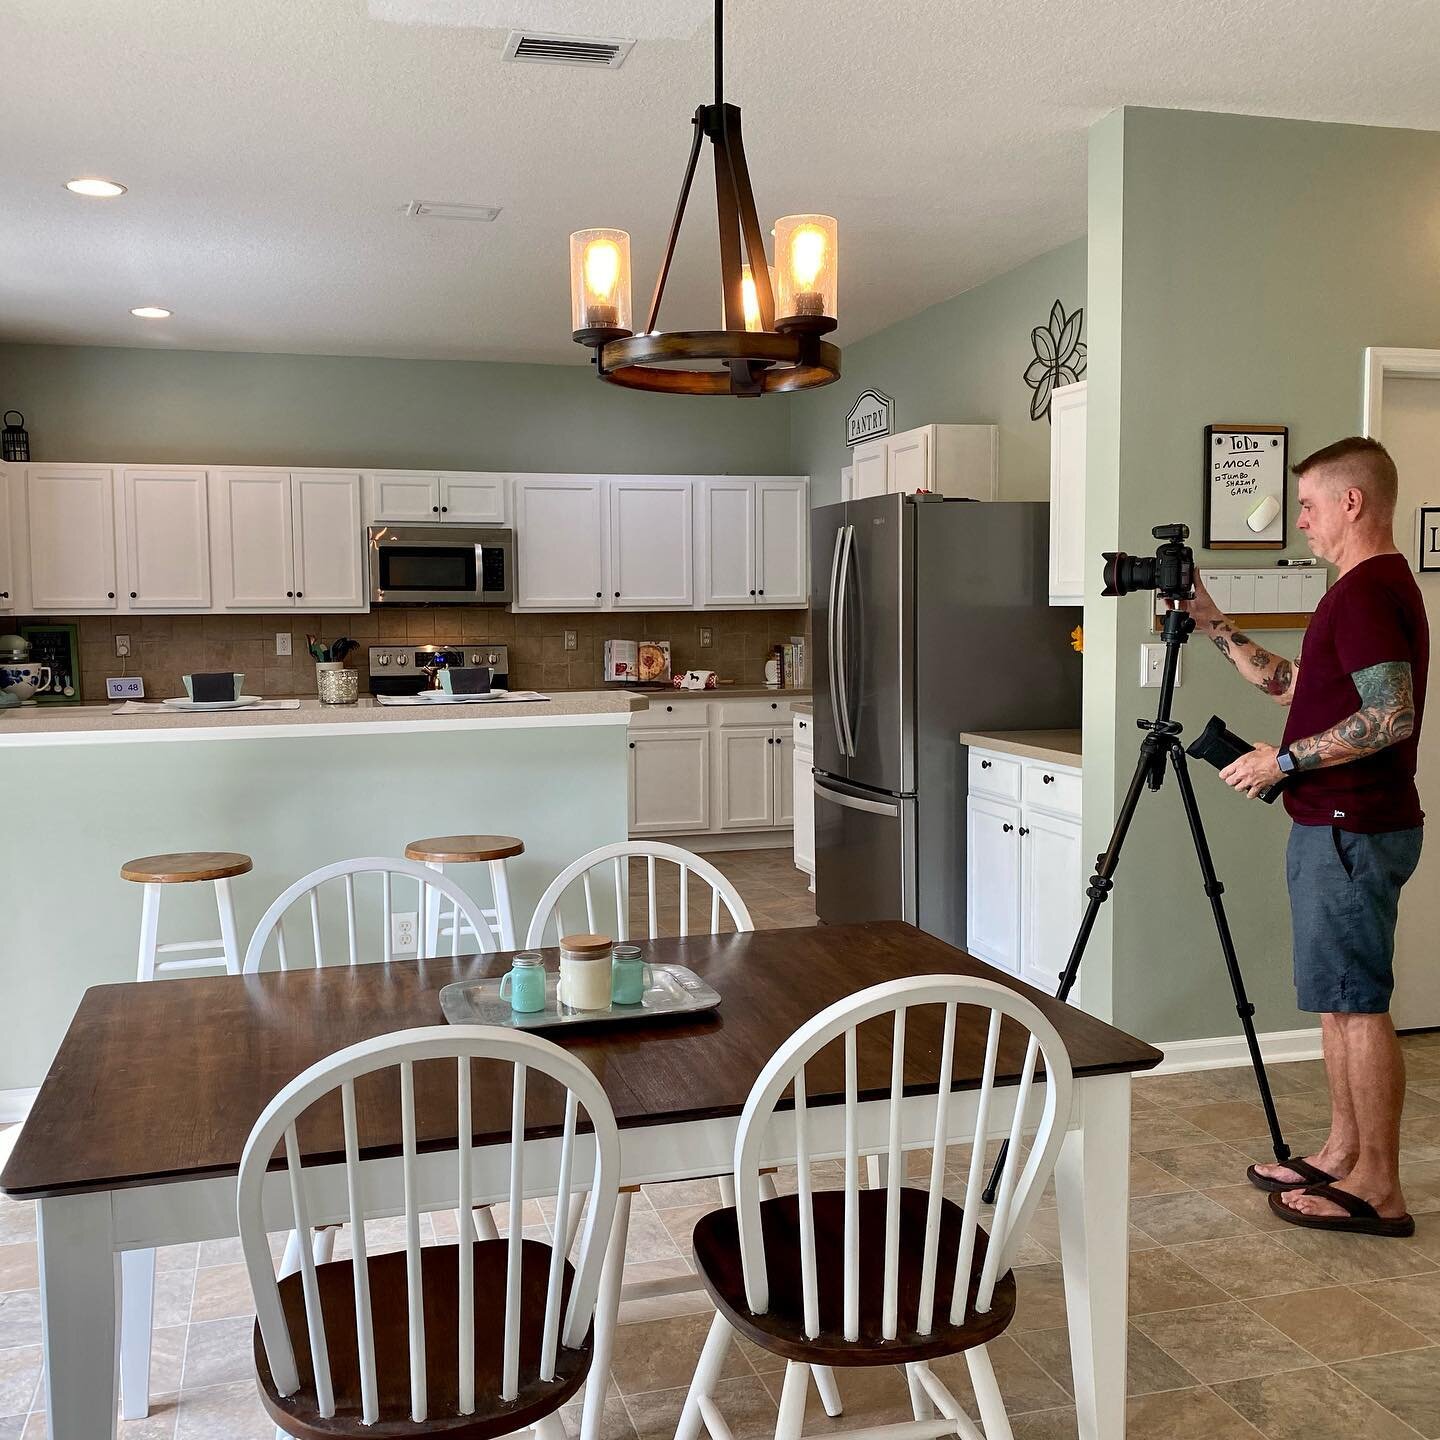 ✔️ Beautifully Staged &amp; Decorated
✔️ Photos &amp; Drone Complete

Going Live in ✌🏻 Weeks! 

#newlisting #madsaboutjax #forsale #jaxrealestate #jacksonvillerealtors #kellerwilliams #jacksonvillerealestate #jacksonville #photoday #photoshoot